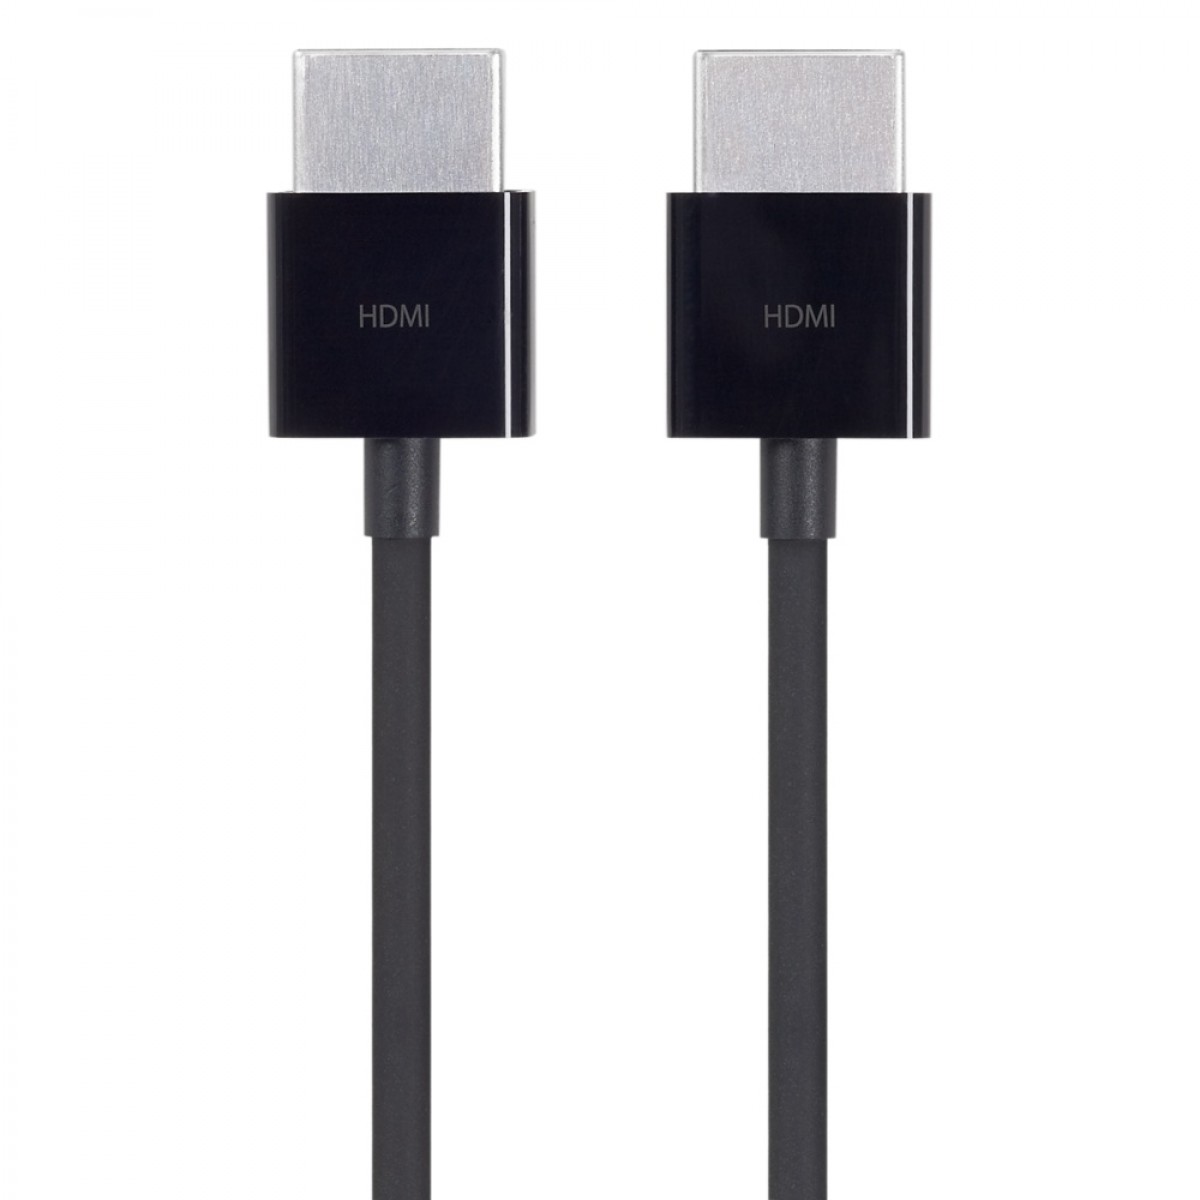 MHL HDMI cable for Apple devices, 1.8 m (CC-LMHL-01)